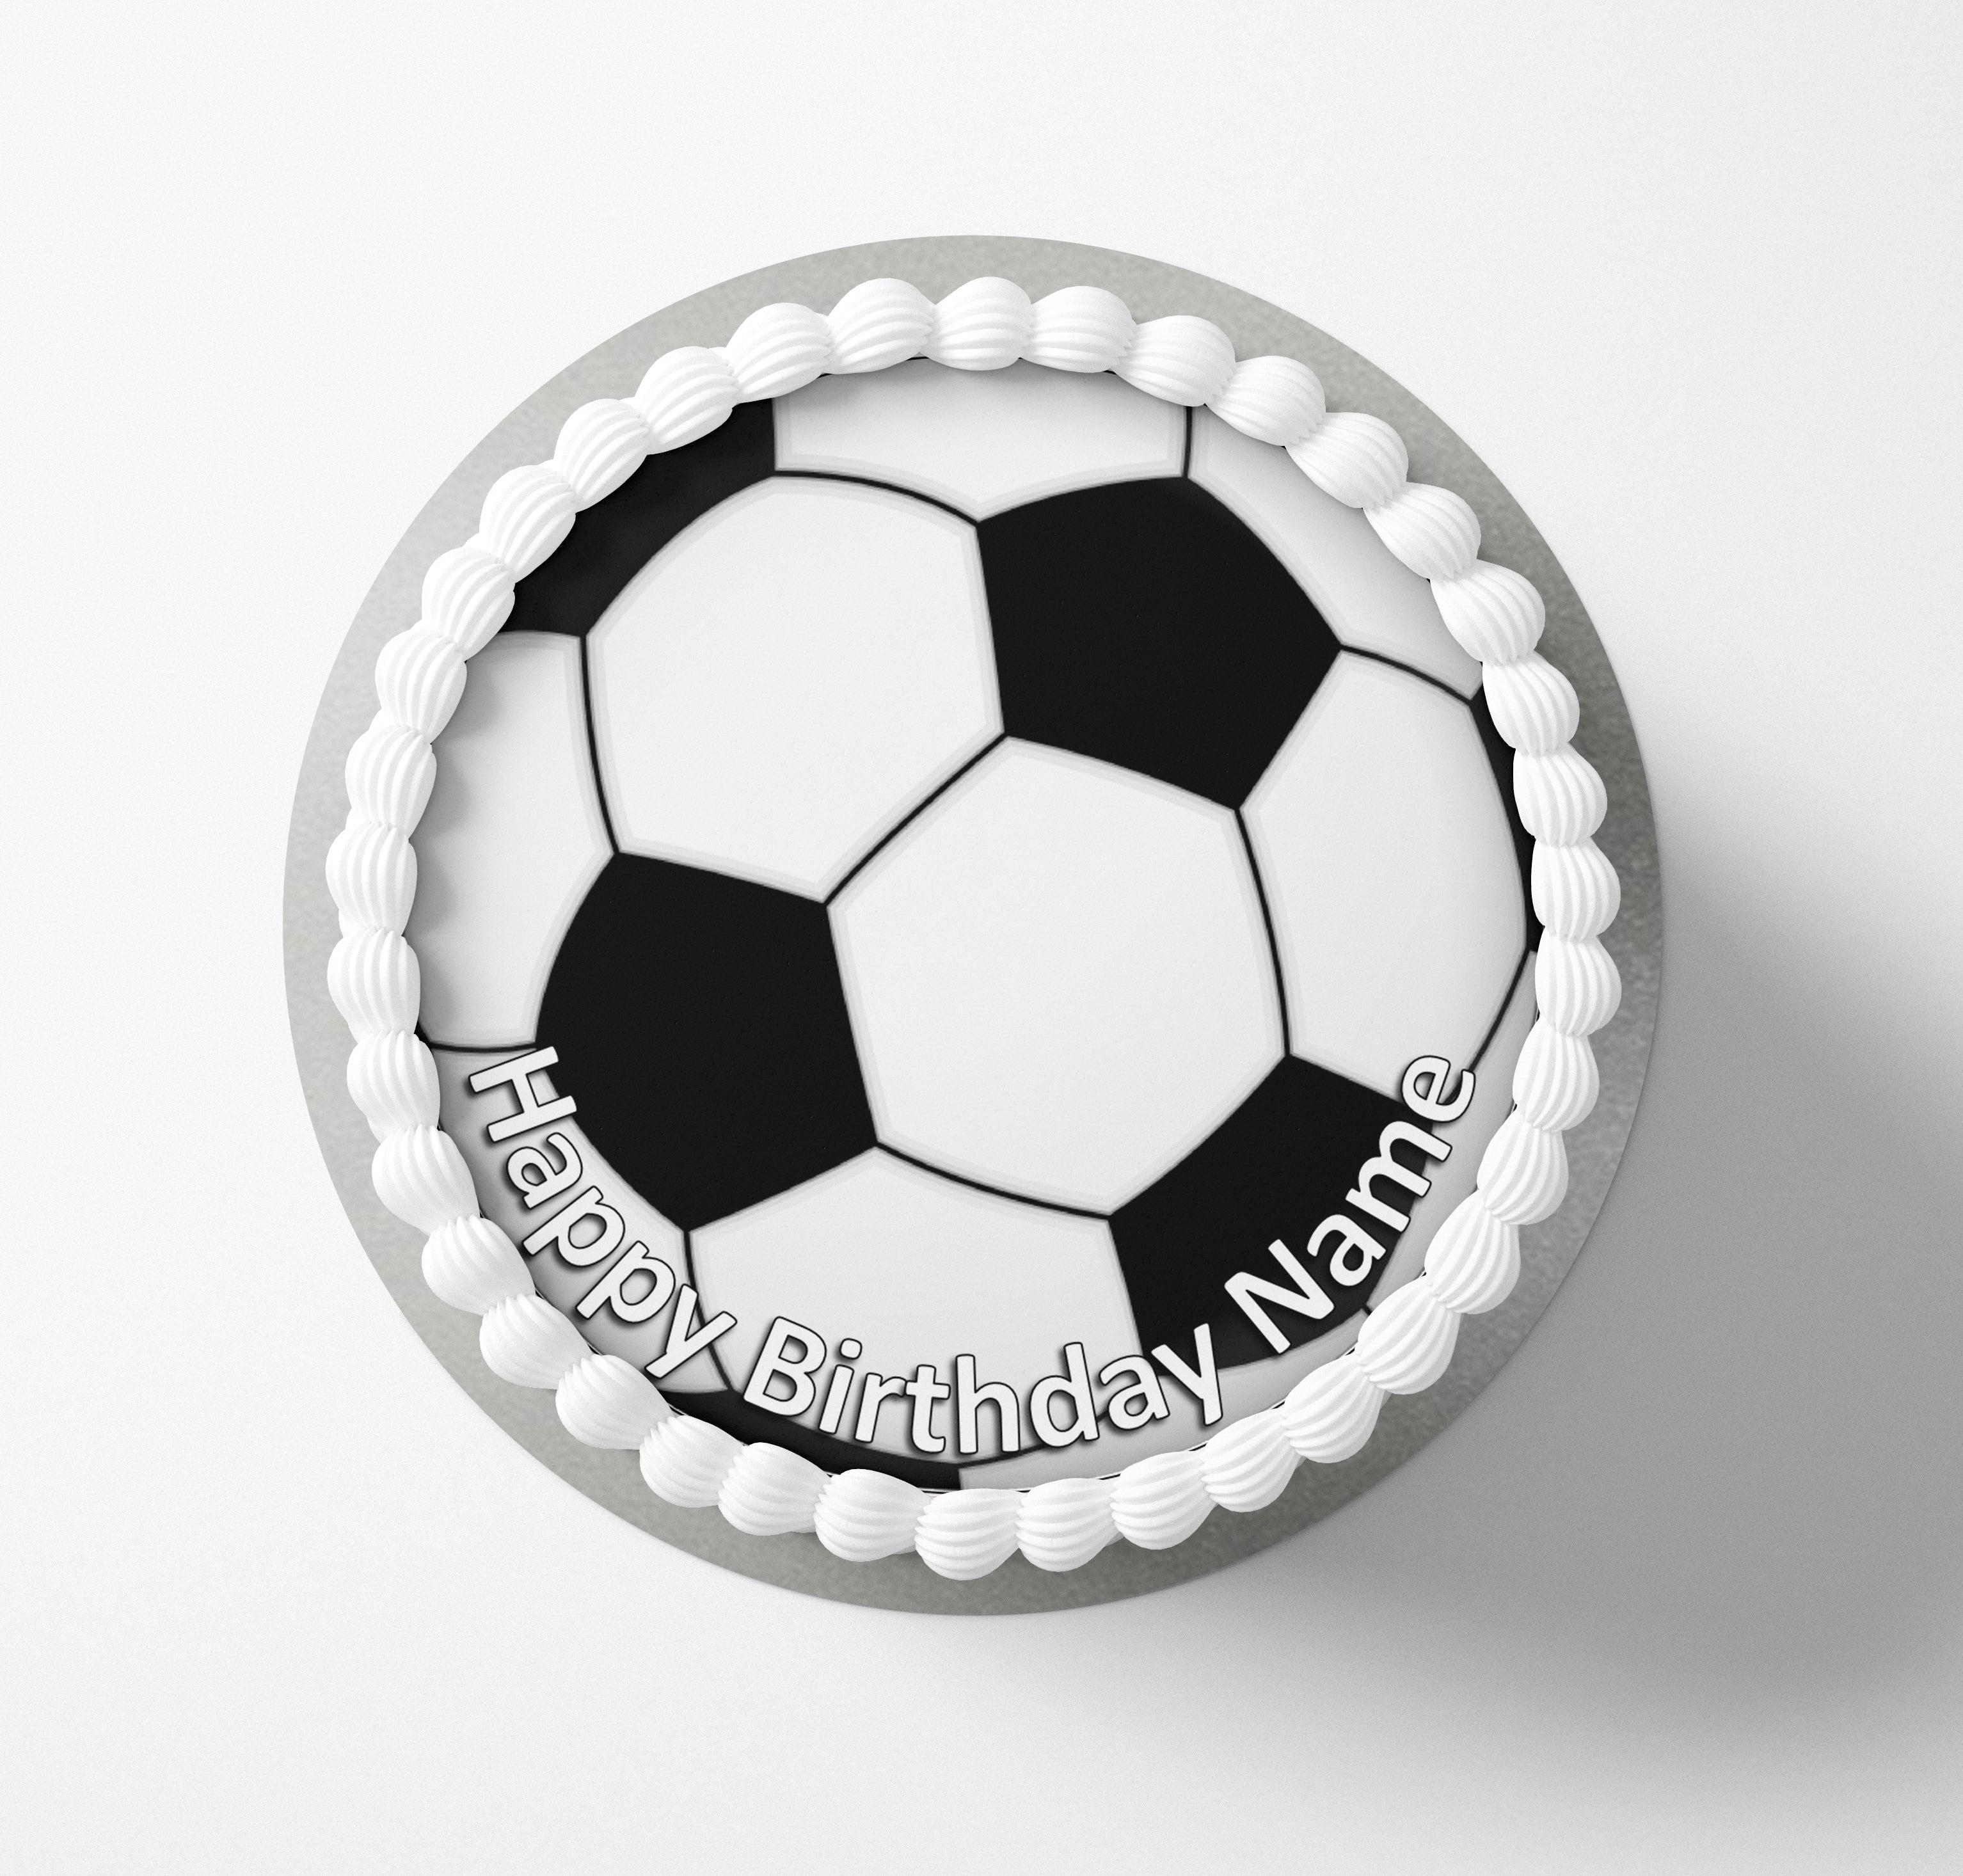 Football, Boots and Happy Birthday Motto Cake Topper